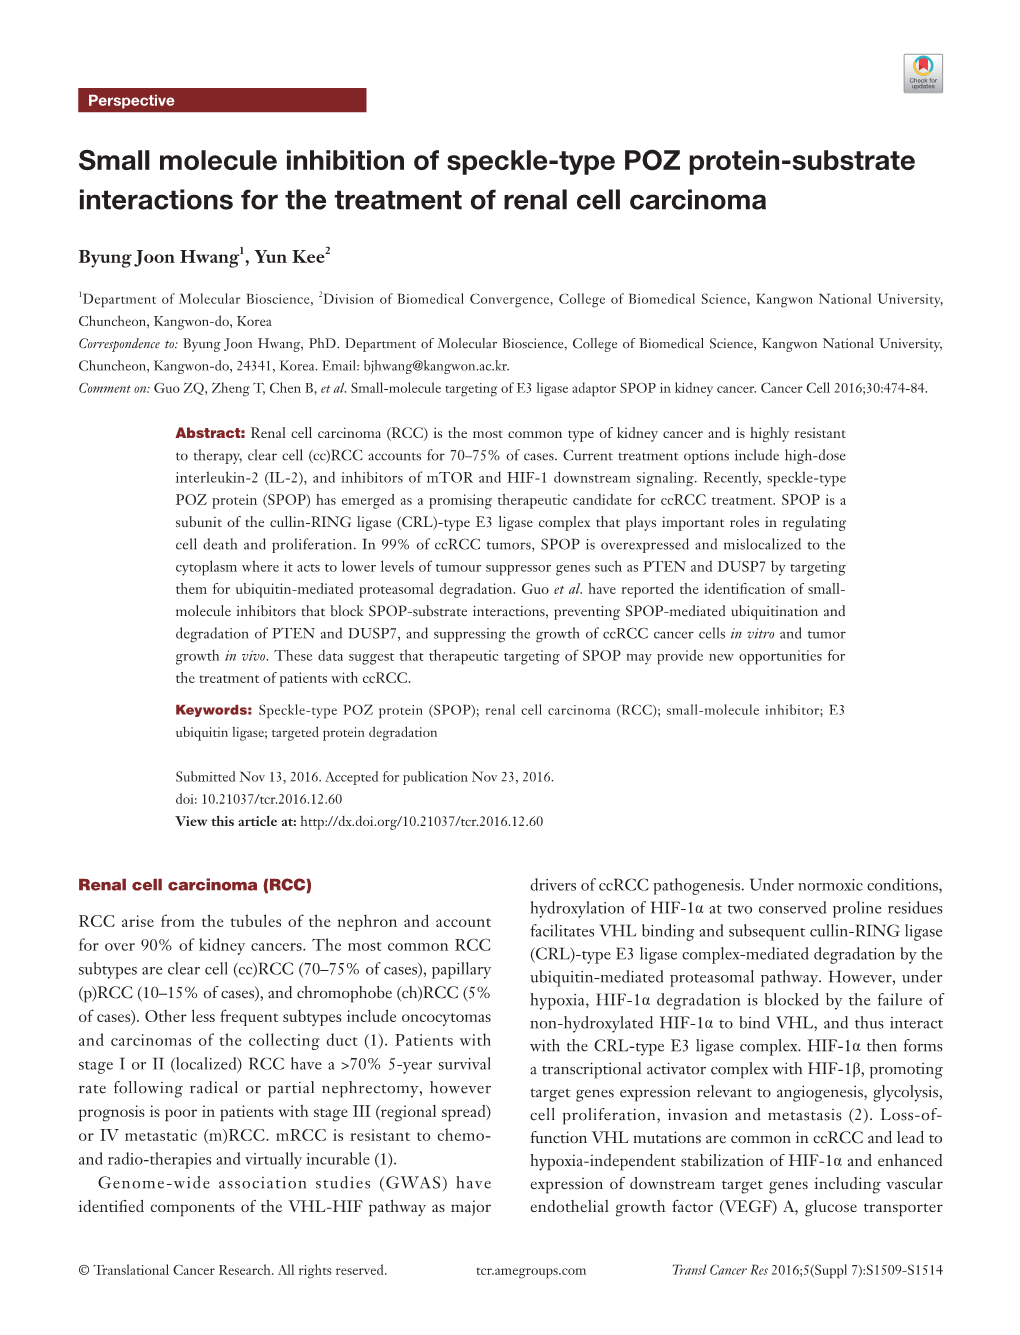 Small Molecule Inhibition of Speckle-Type POZ Protein-Substrate Interactions for the Treatment of Renal Cell Carcinoma